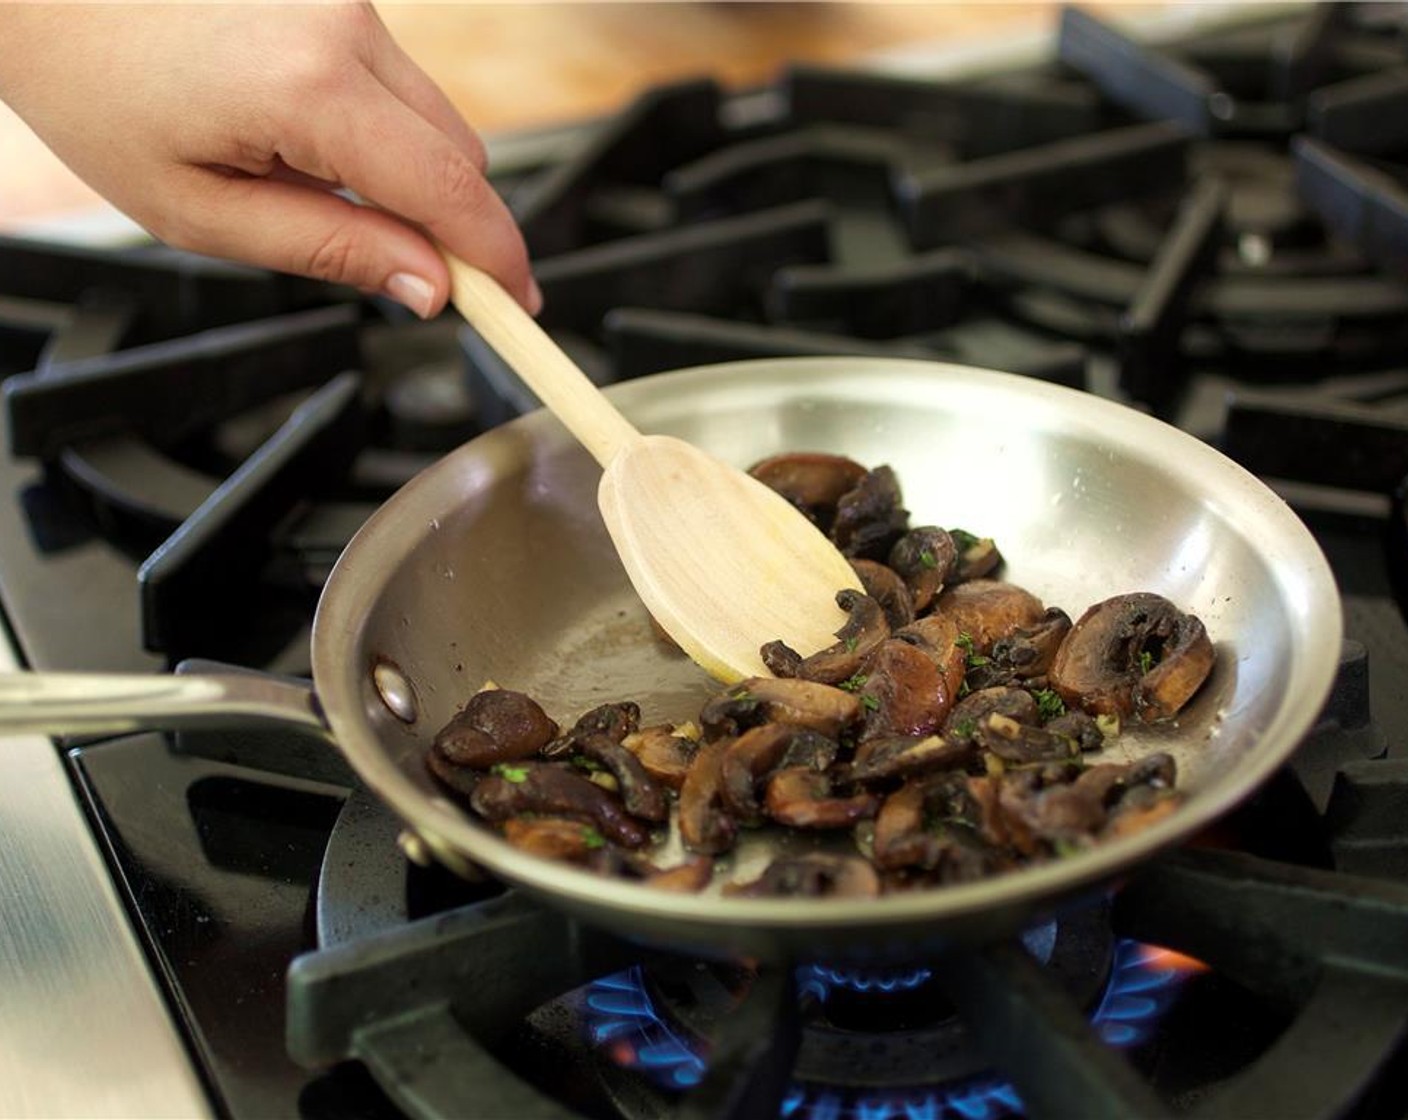 step 9 Heat a medium sauté pan over medium high heat. Add Olive Oil (1 tsp) to the sauté pan. Add mushrooms and cook until soft, about 5 minutes.